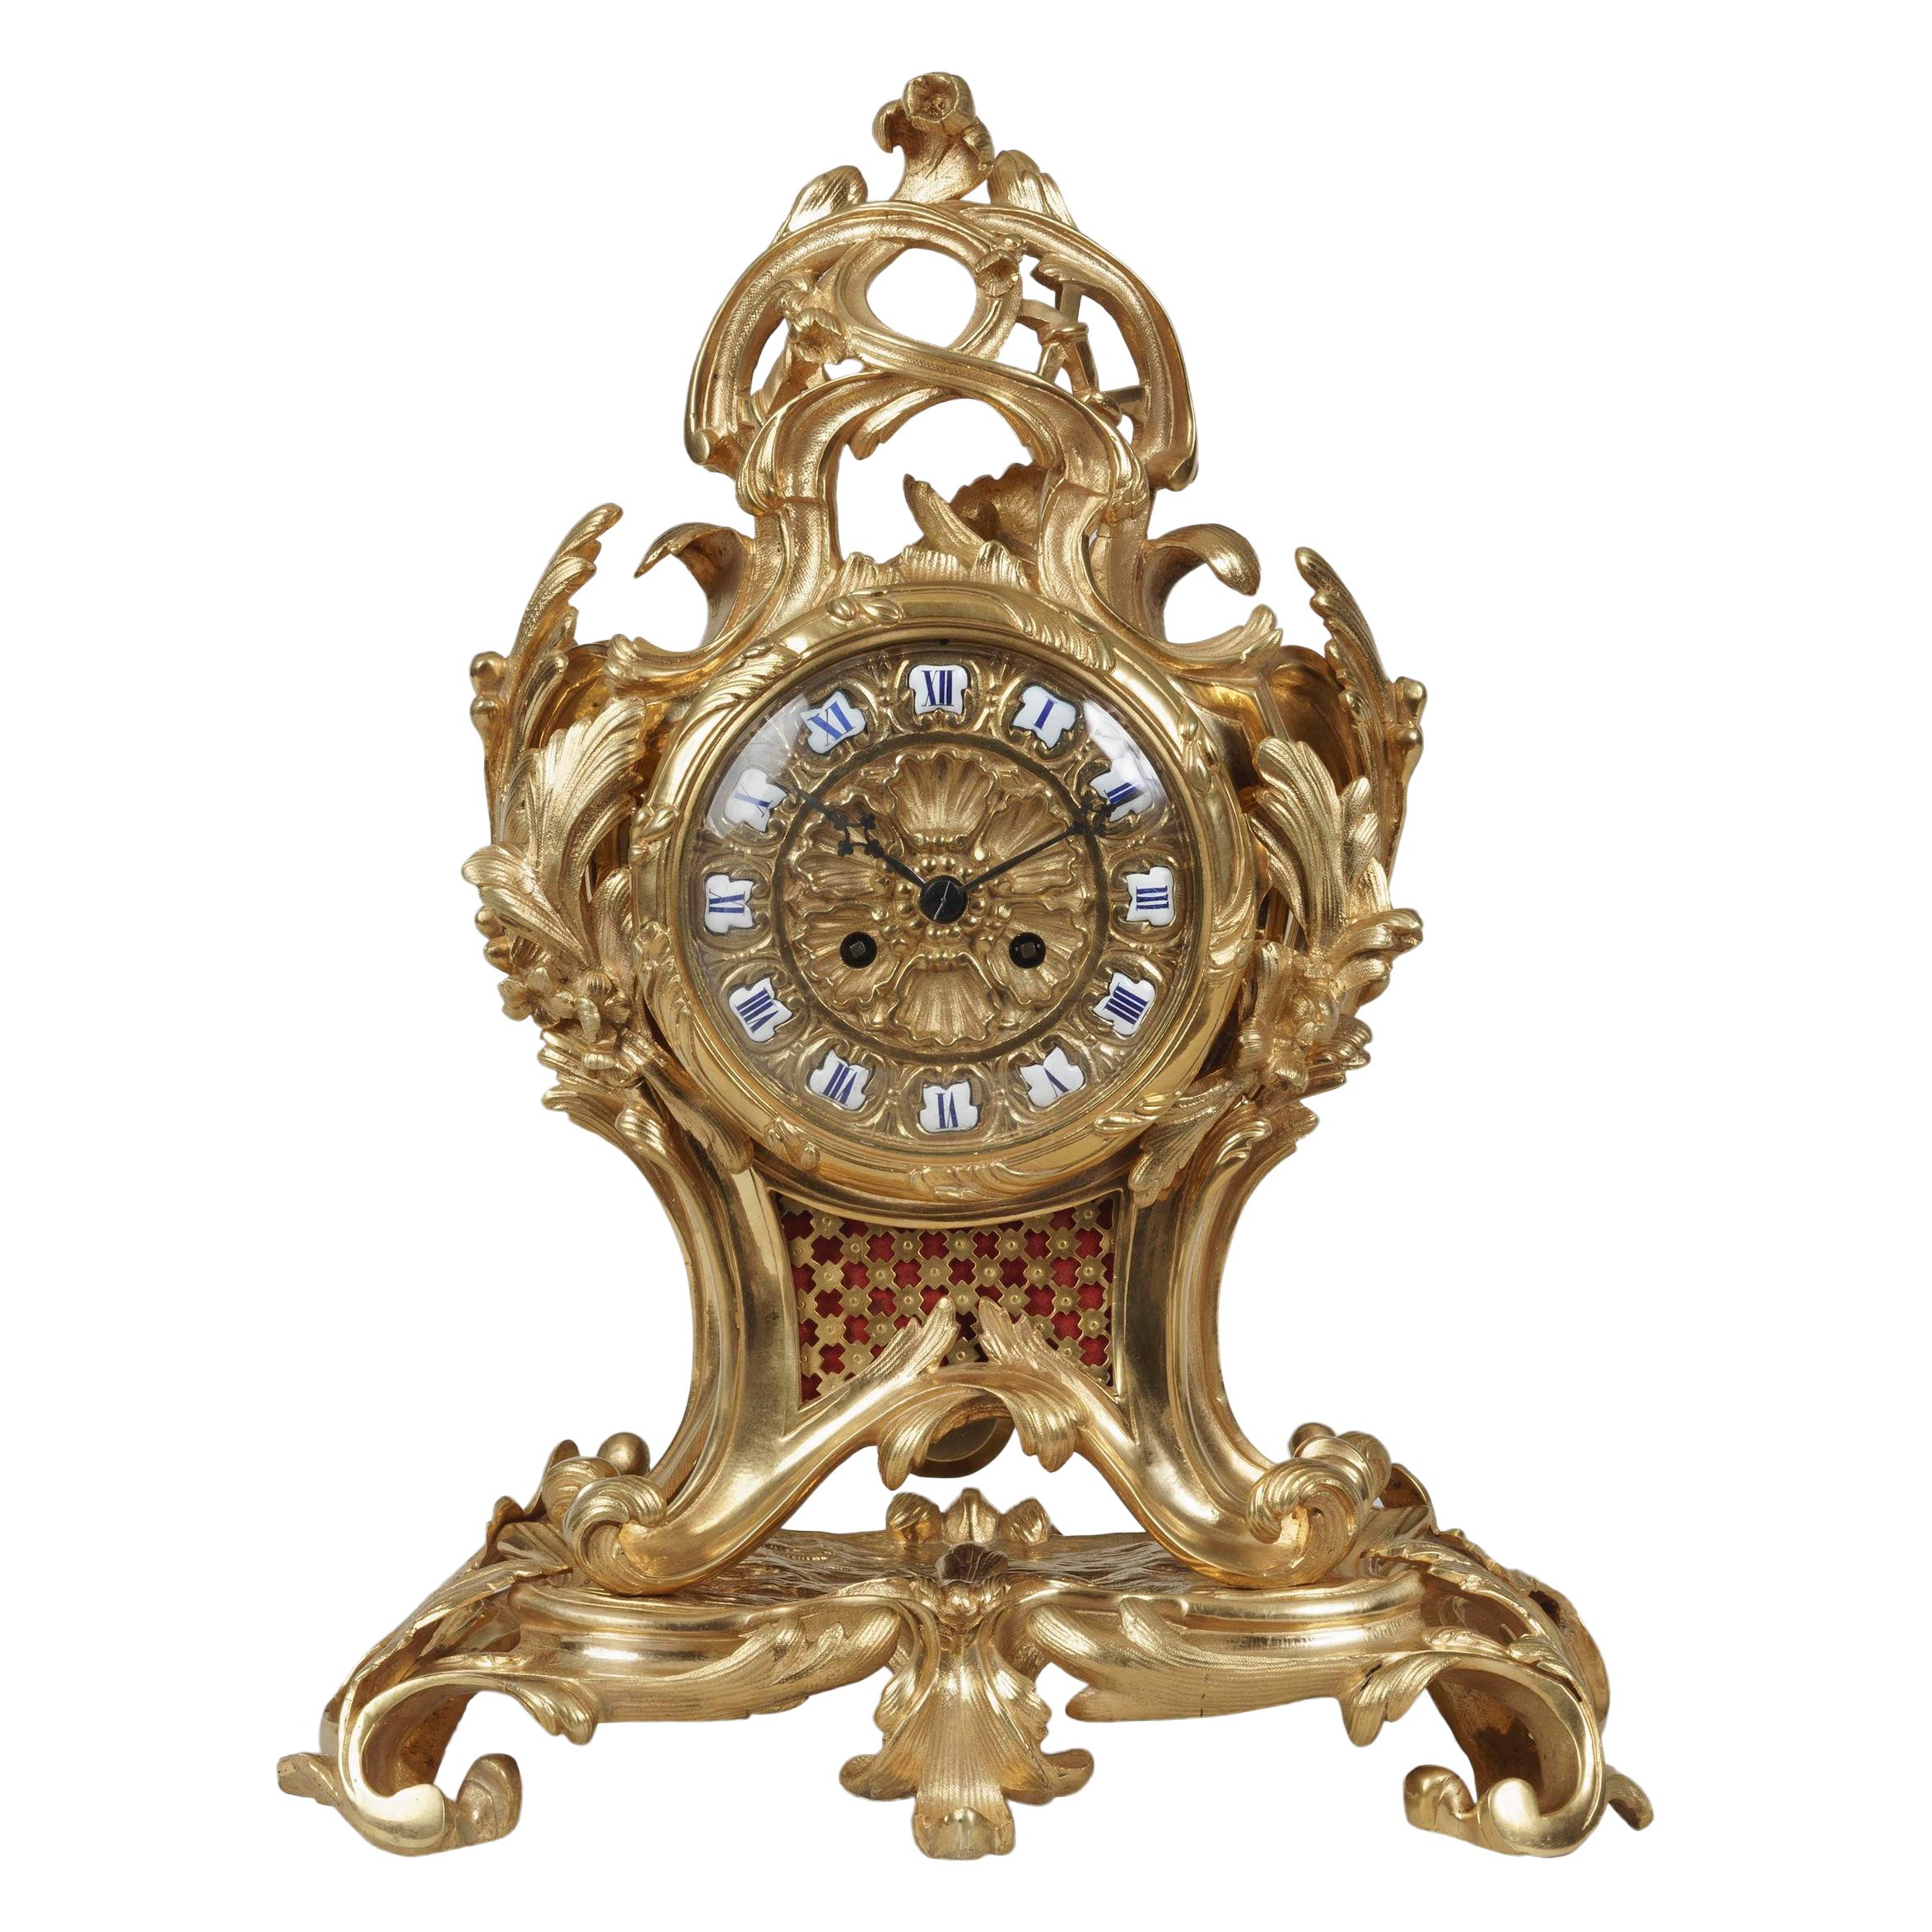 19th Century French Ormolu Mantle Clock in the Louis XV Style